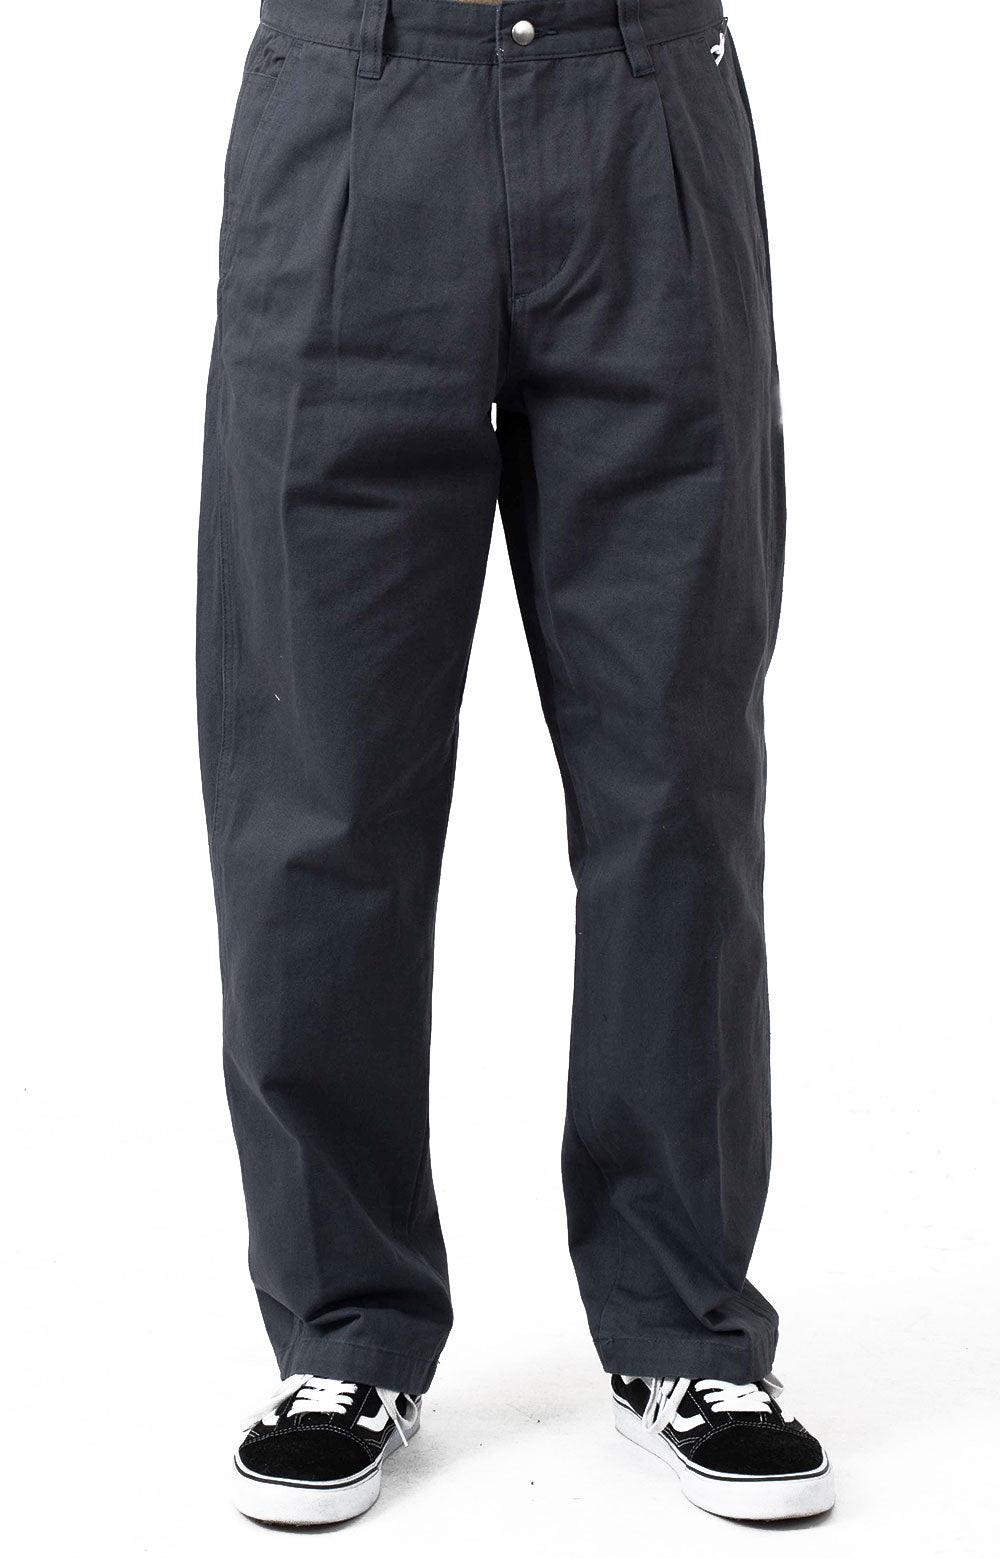 Estate Pant - French Navy